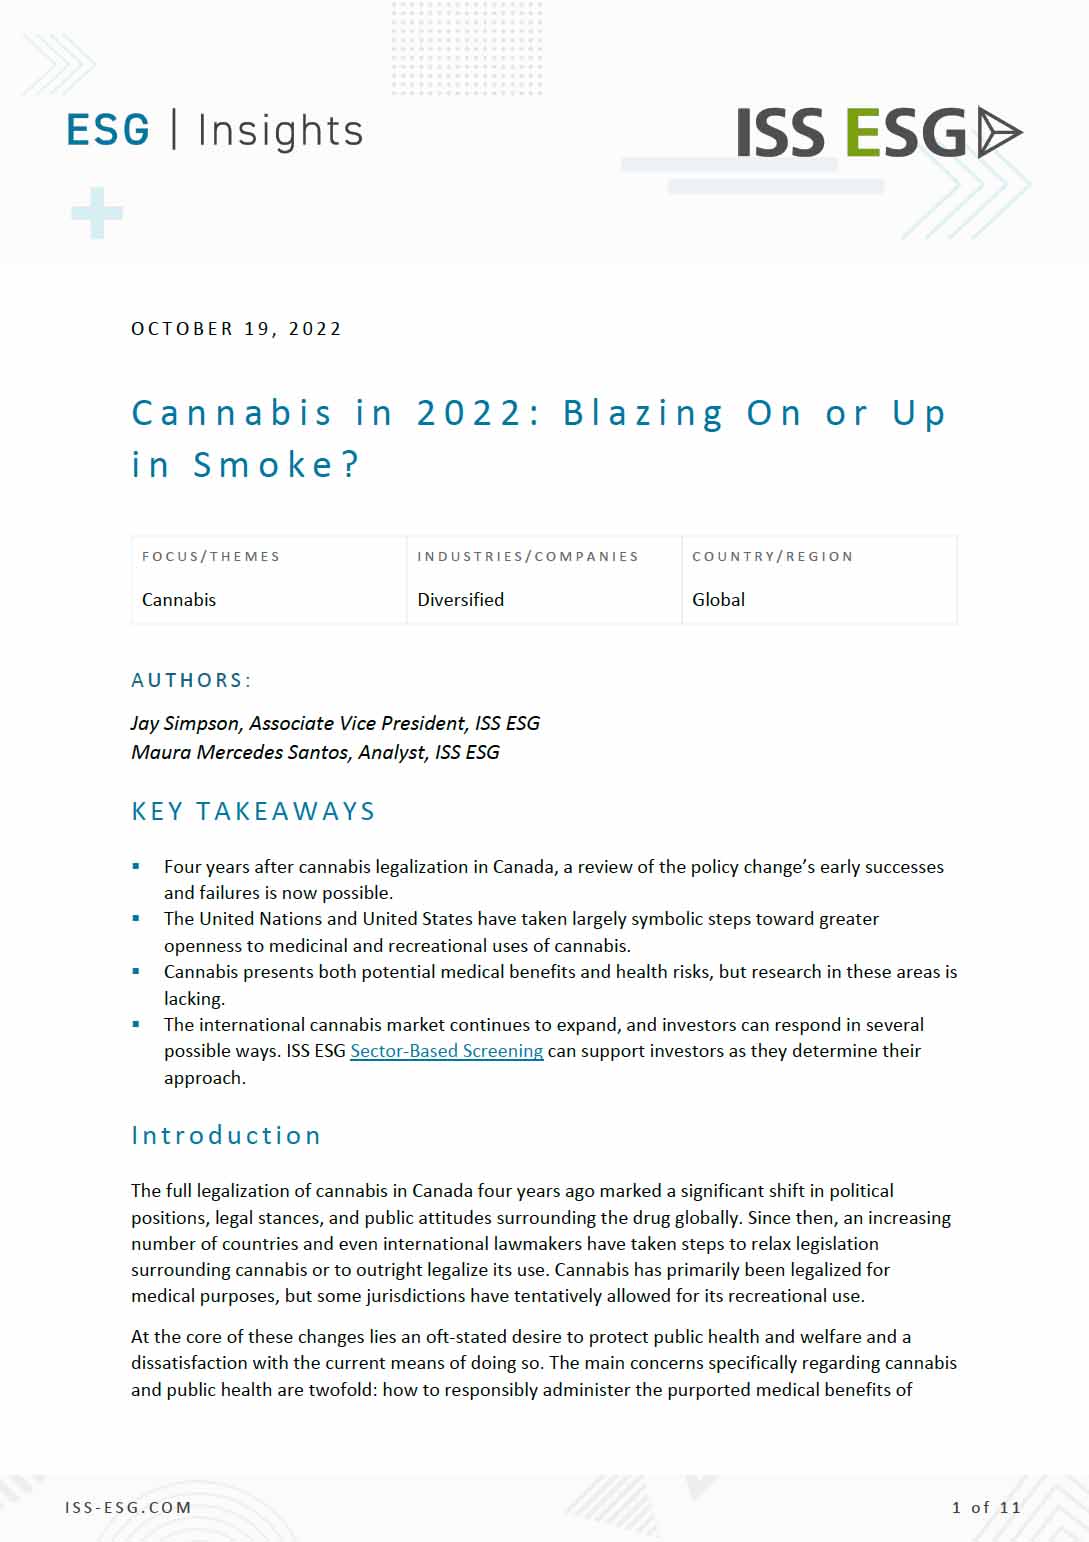 Cannabis in 2022: Blazing On or Up in Smoke?